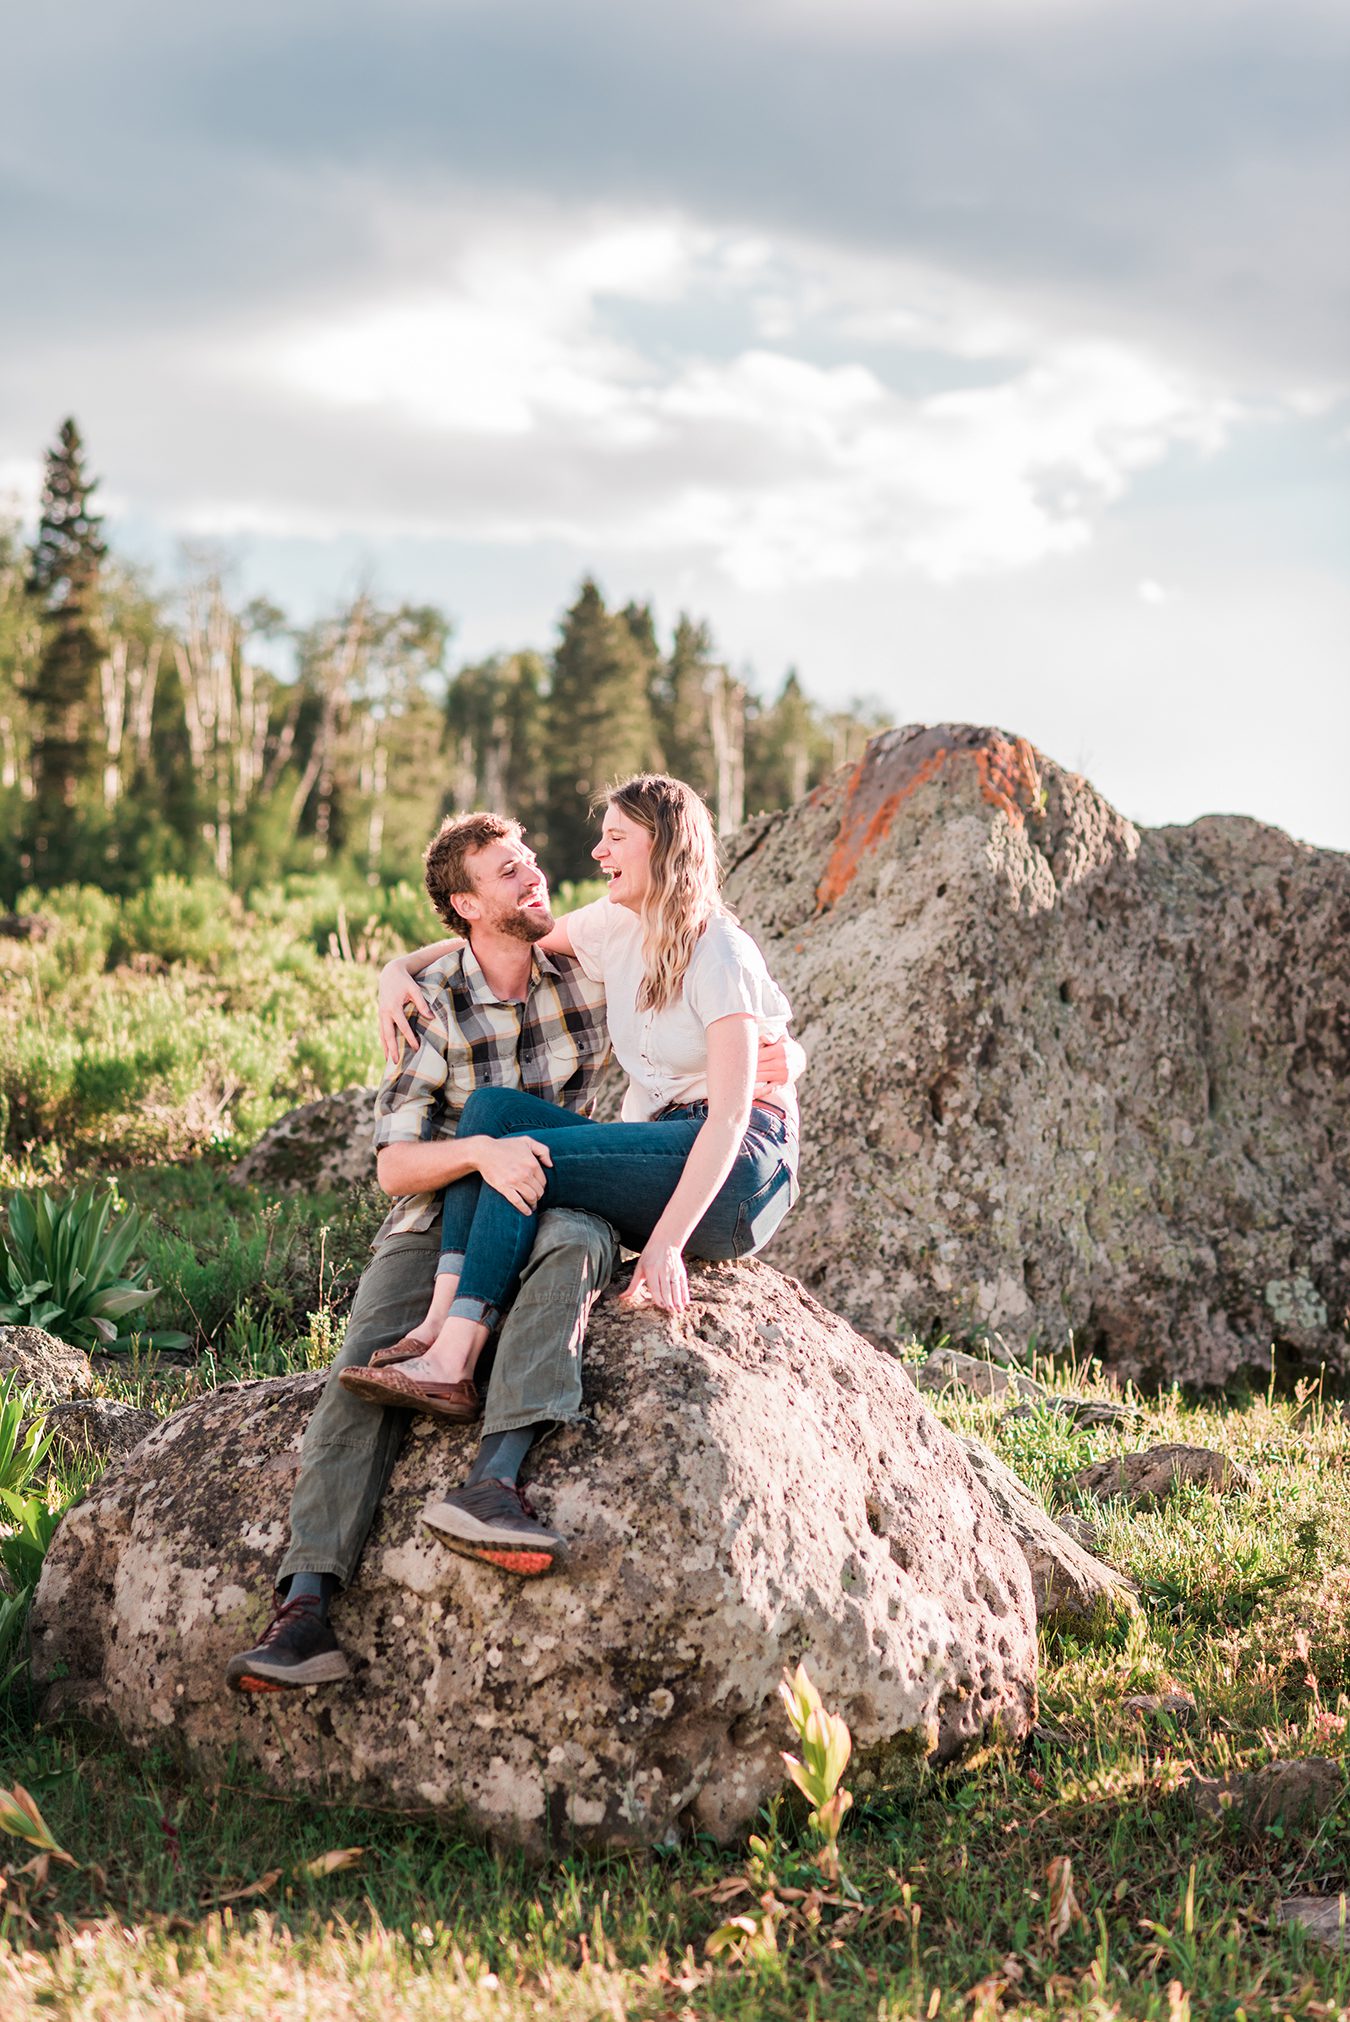 Annie & Taylor sitting on a boulder for their Glenwood Springs Engagement Photos